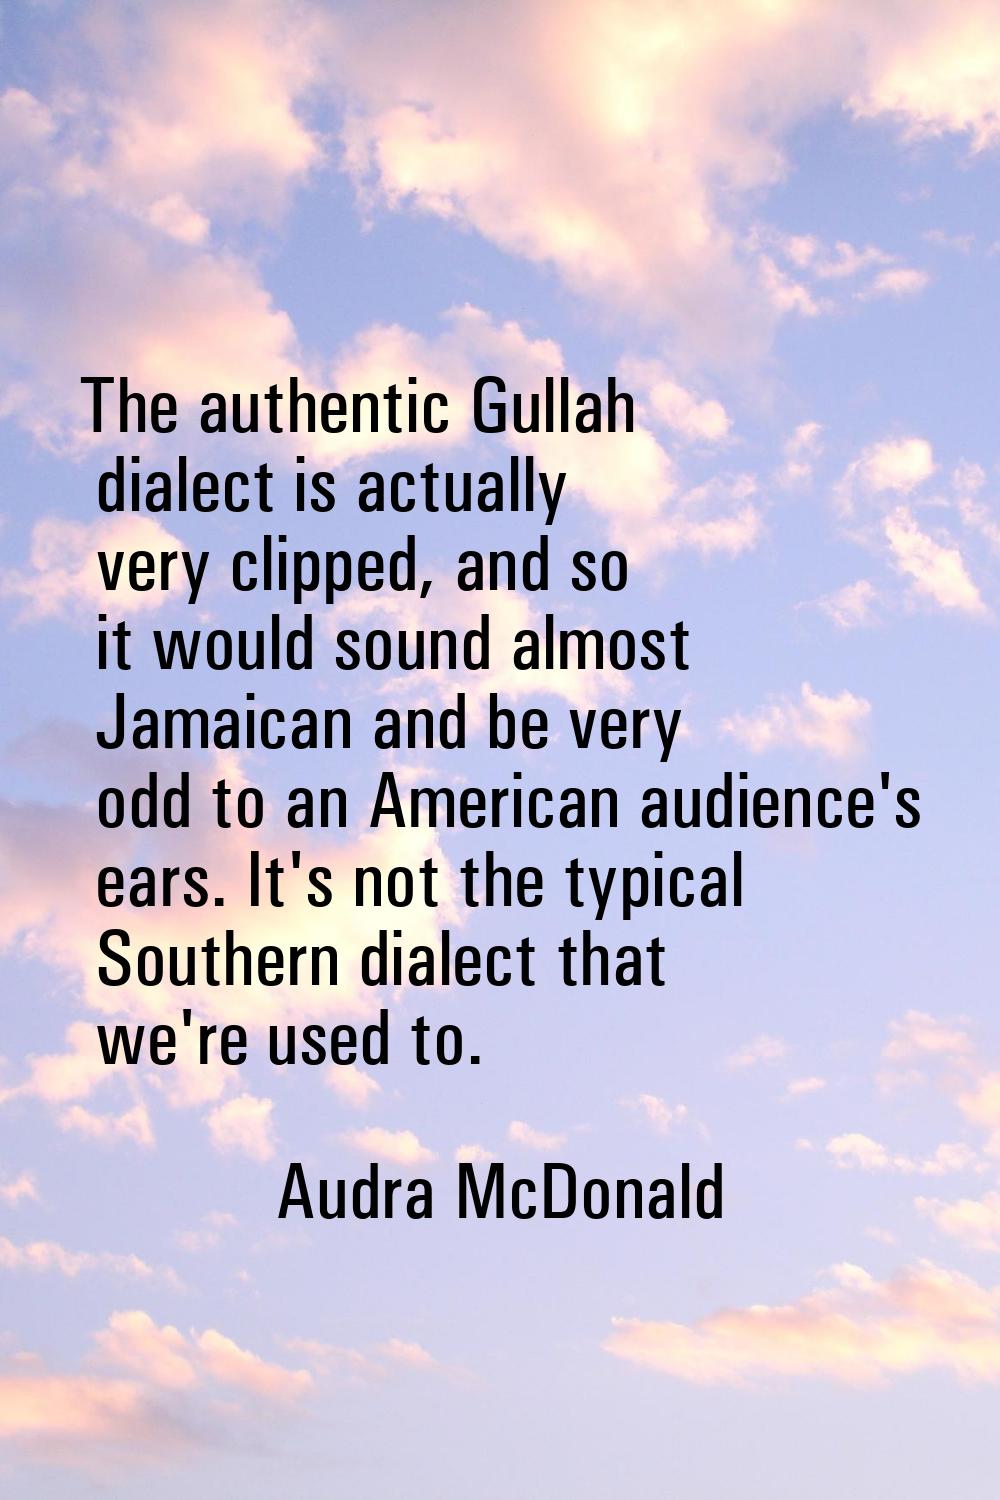 The authentic Gullah dialect is actually very clipped, and so it would sound almost Jamaican and be